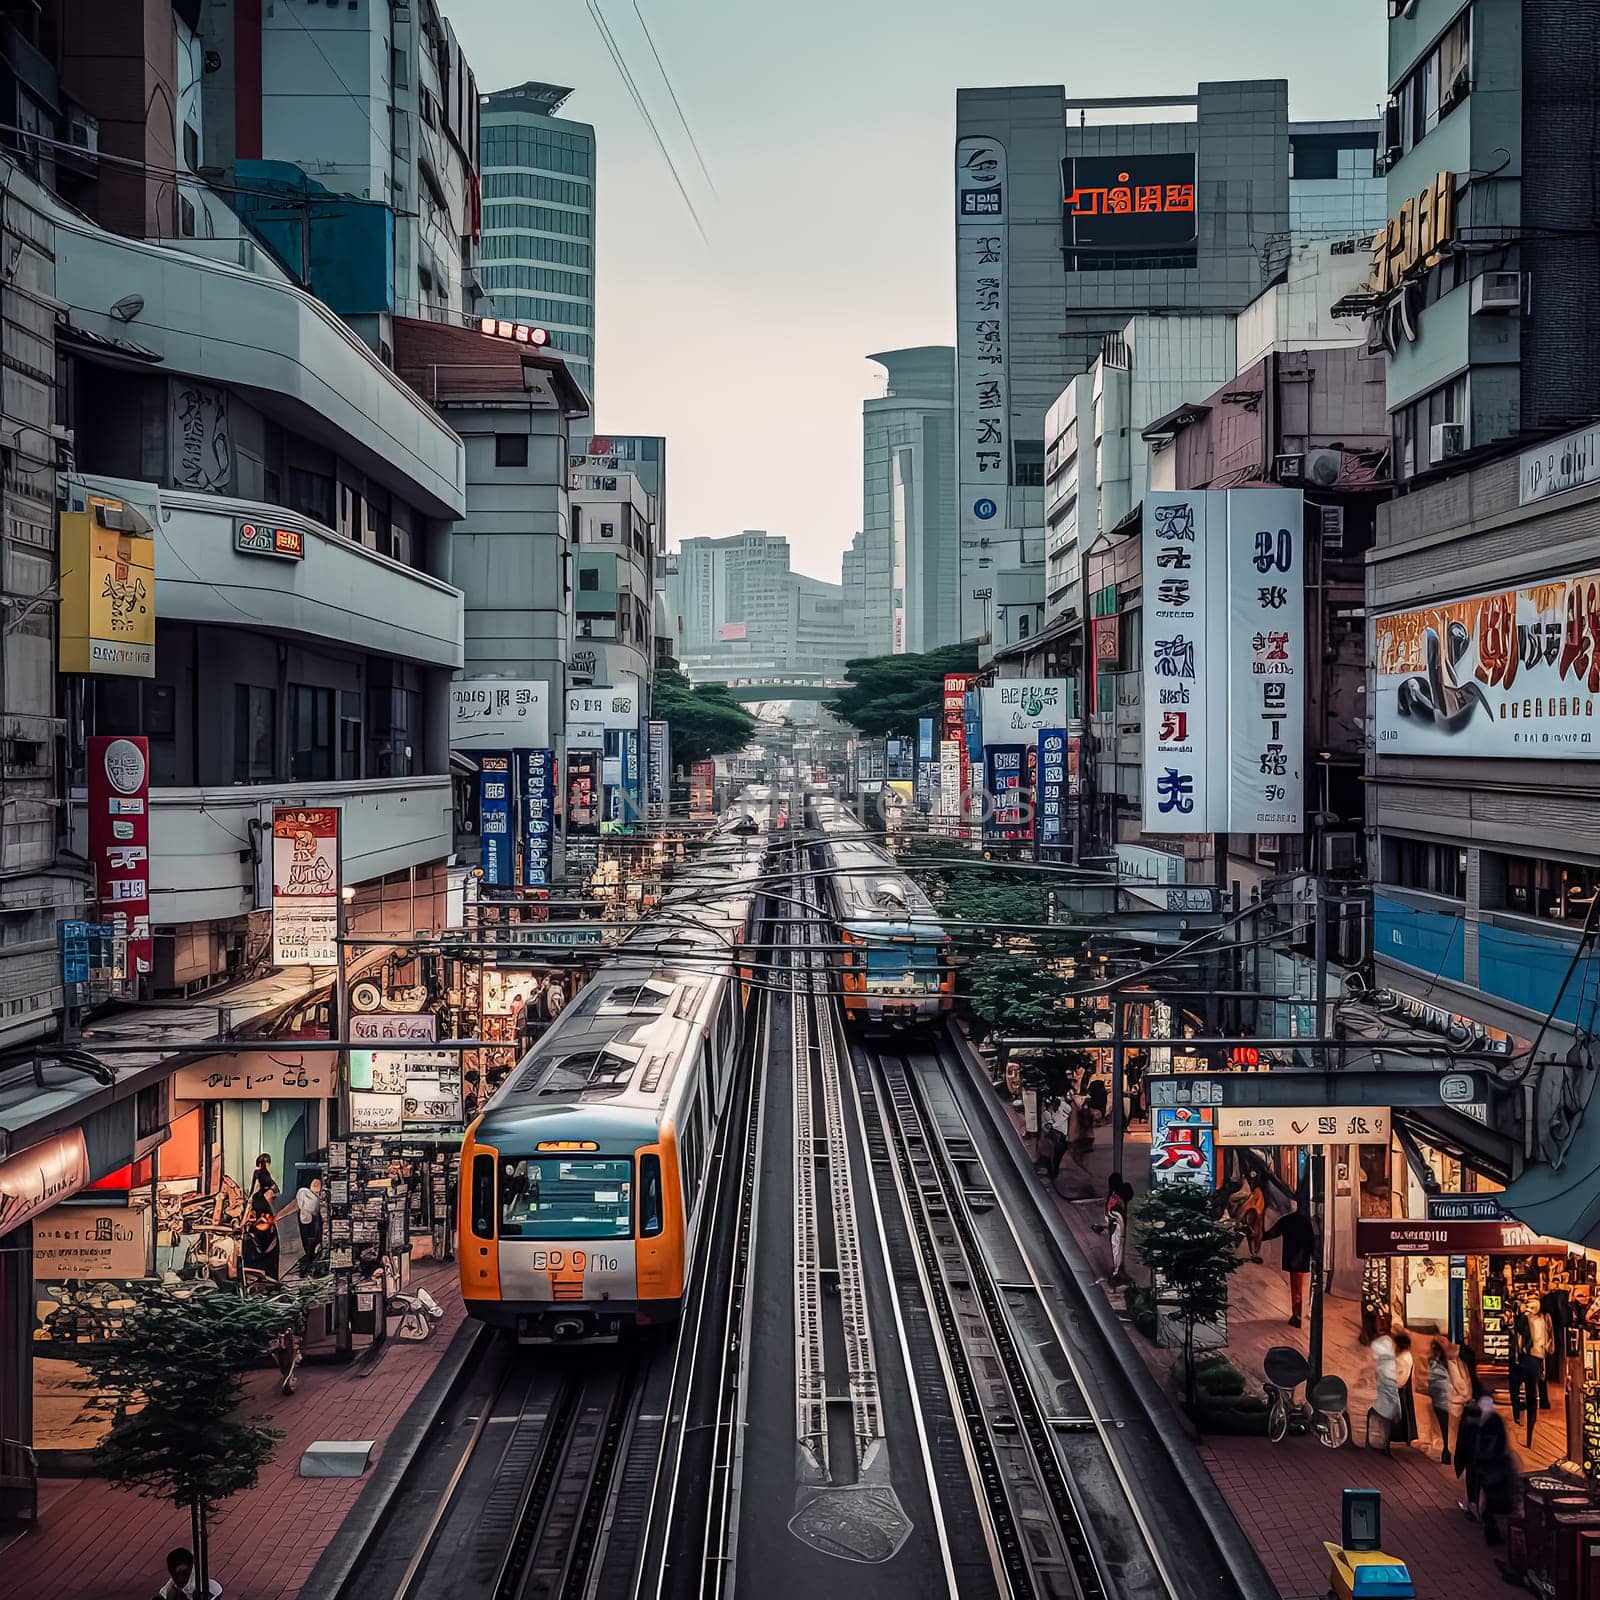 A train is traveling down a track in a city with many people walking around. The train is yellow and is surrounded by tall buildings. Scene is busy and bustling